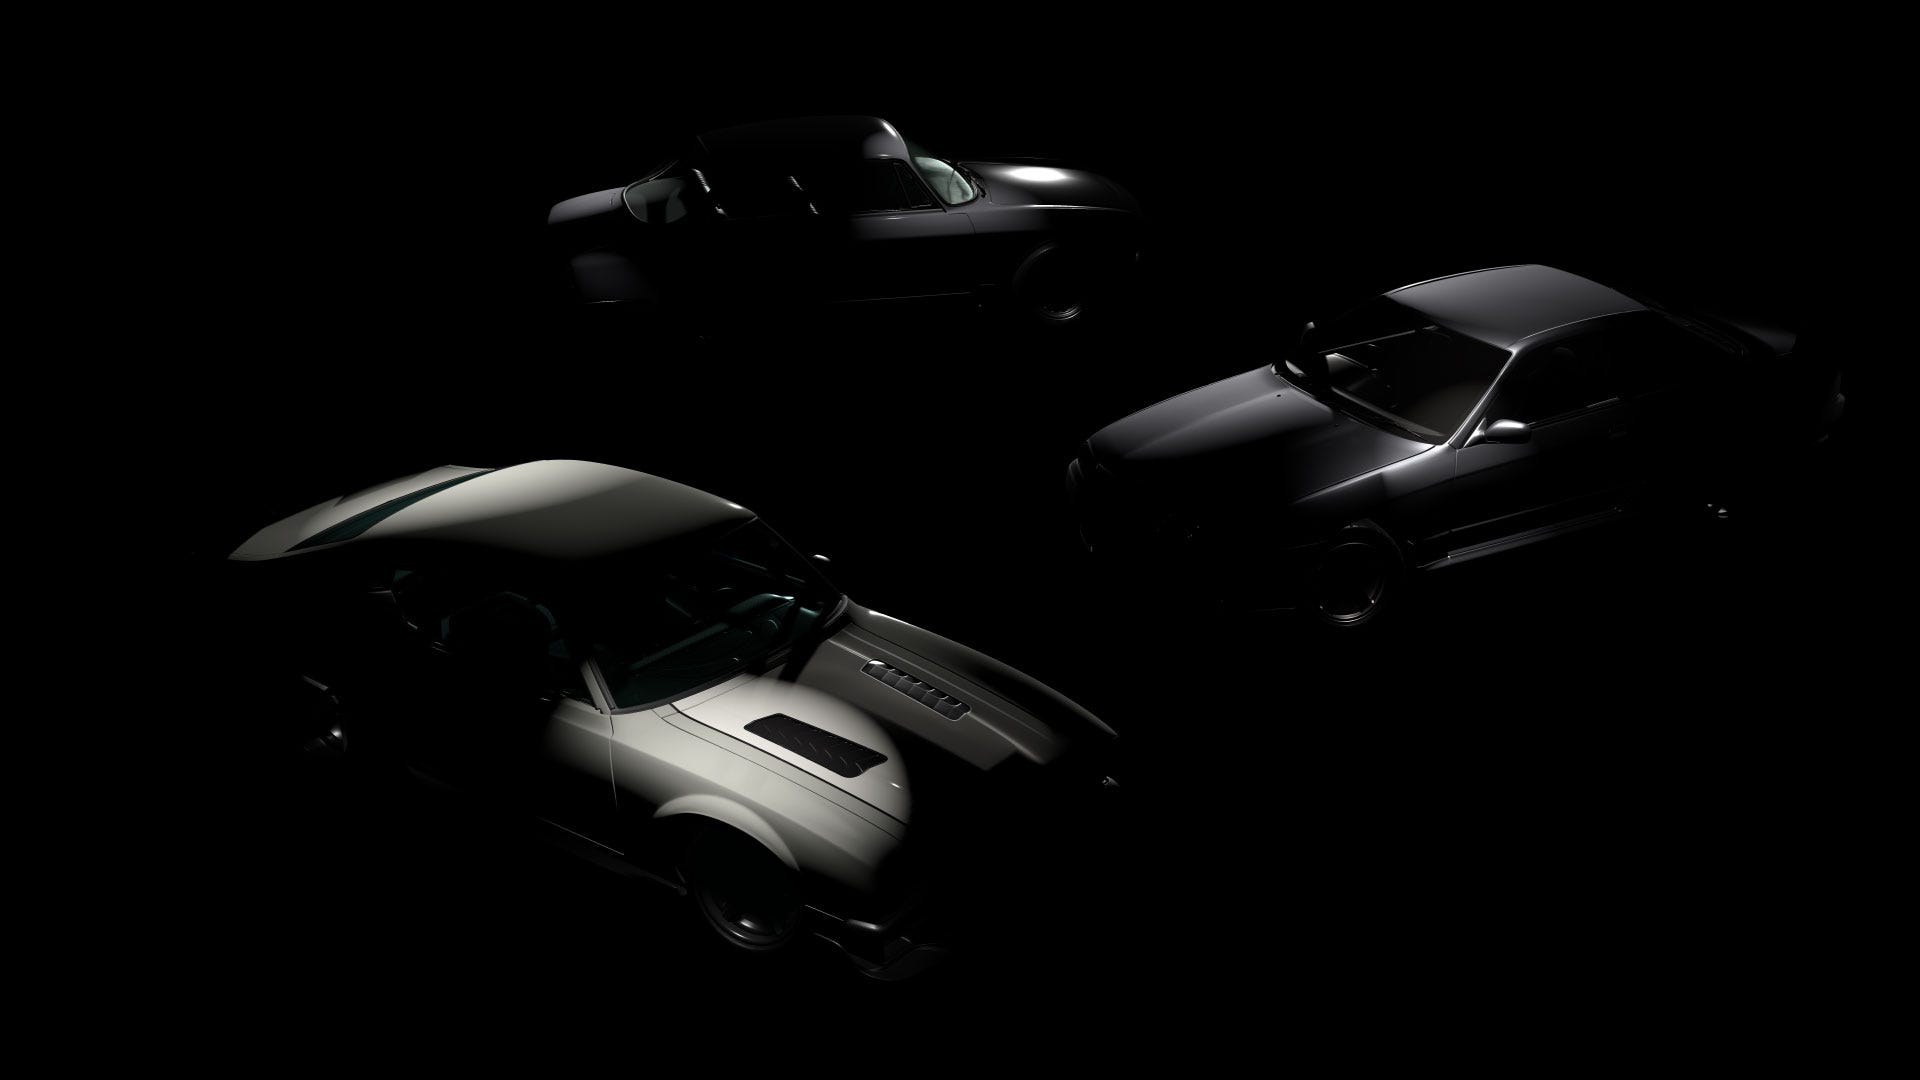 Here’s a peek at the 3 new cars coming to Gran Turismo 7 next week